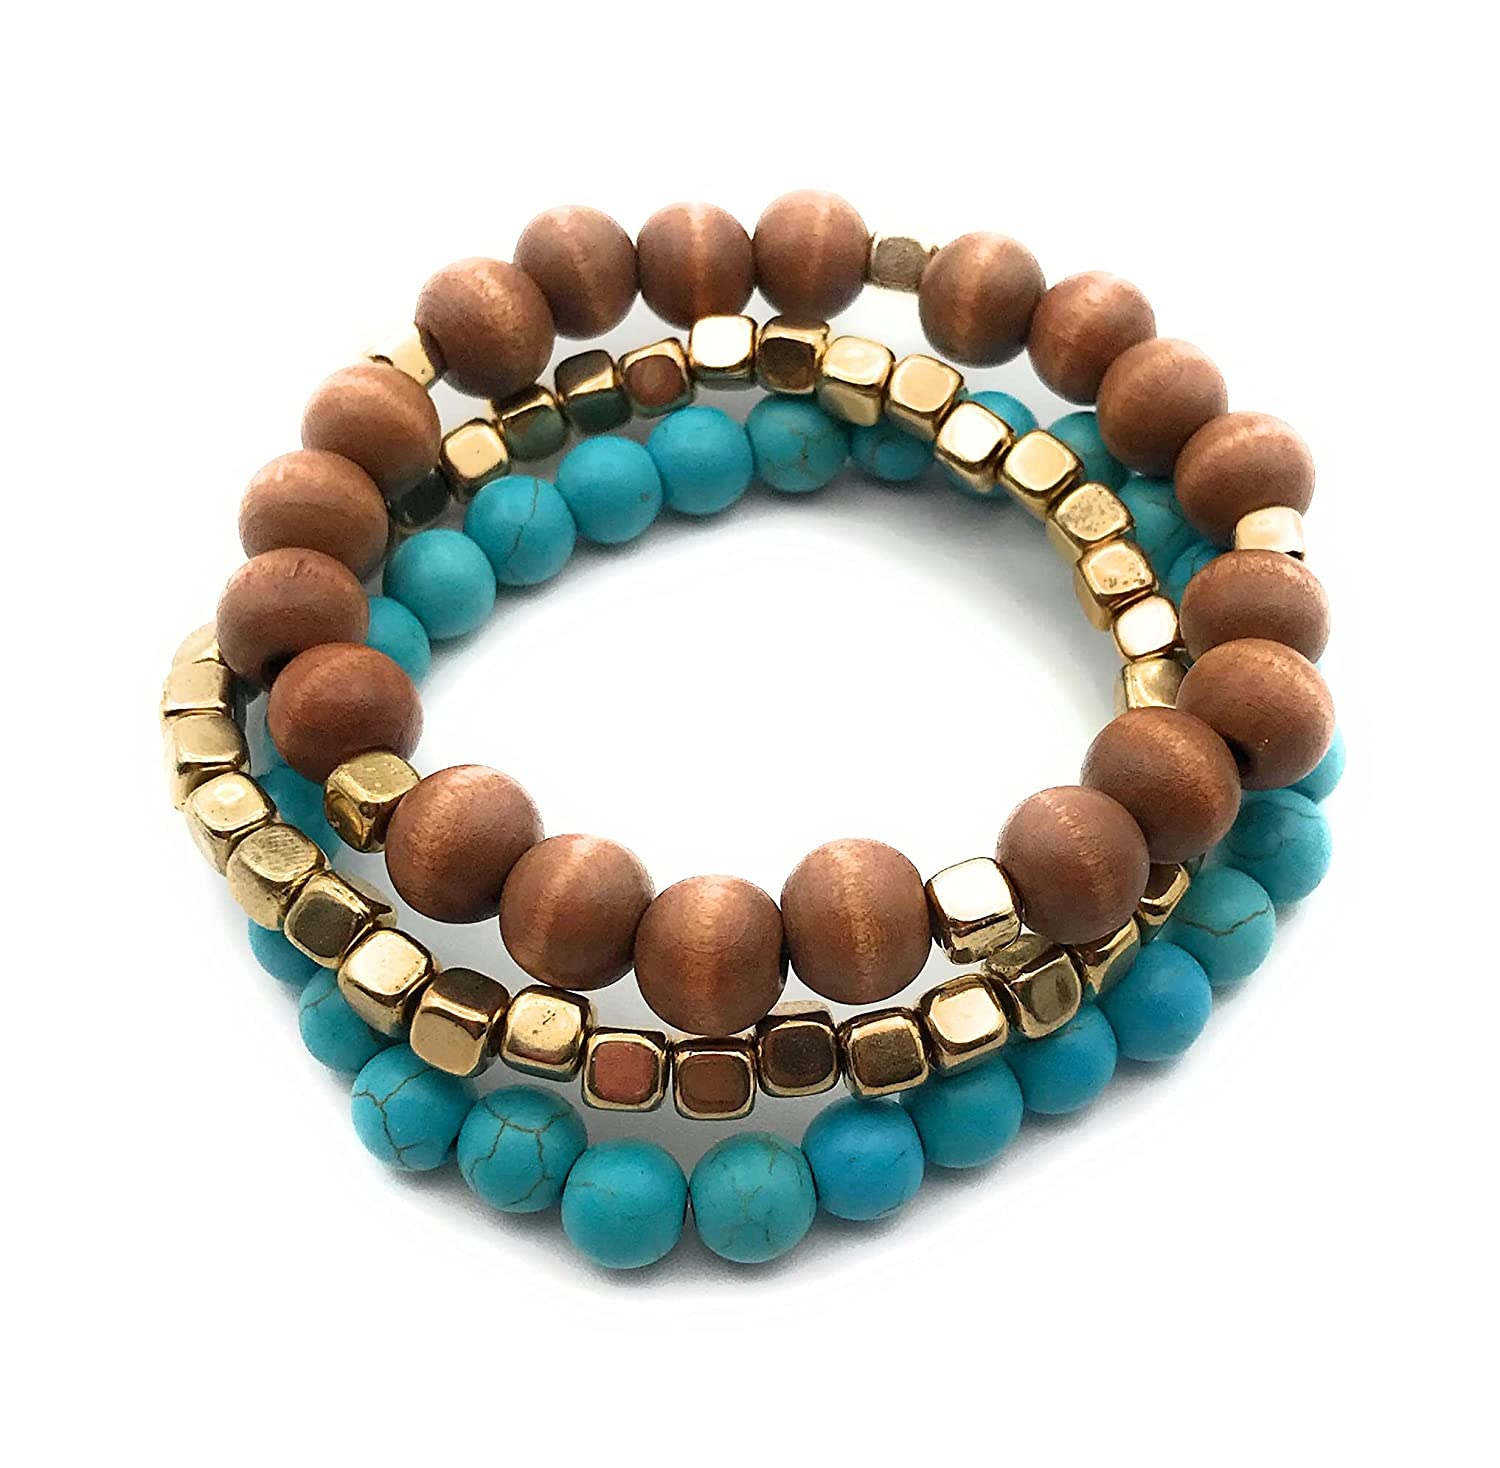 Set of 3 Multi Color Wooden Stretch Bracelets Top View from Scott D Jewelry Designs